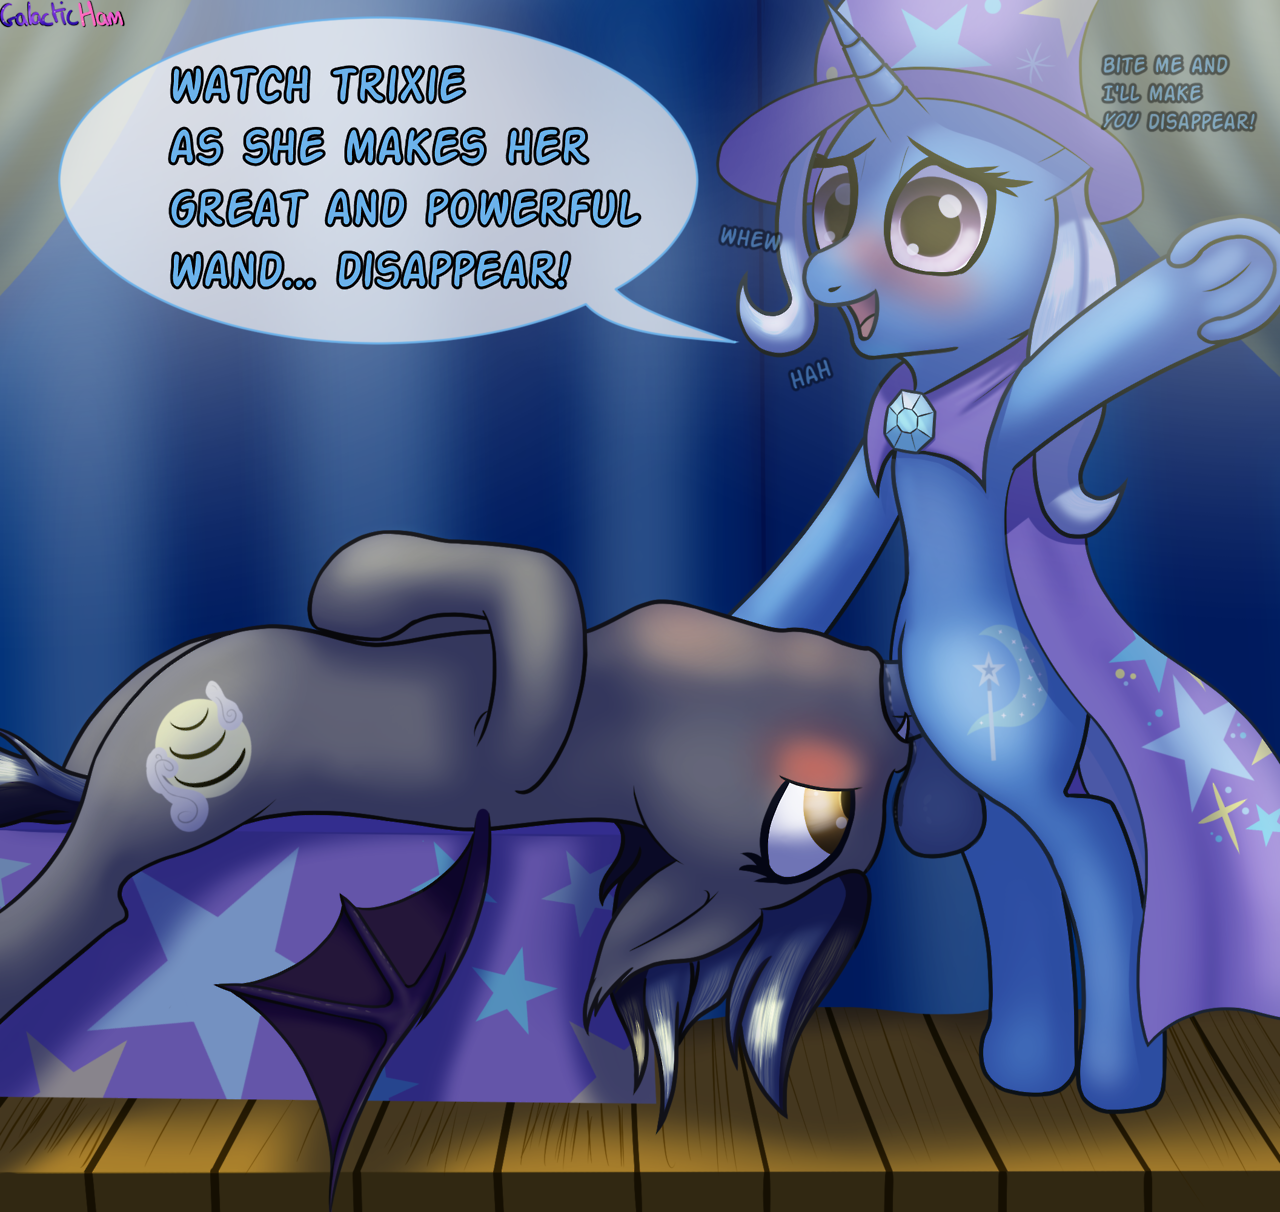 4 / 5 of the 500 follower raffle pics! Here @batponyecho‘s helping out Trixie with